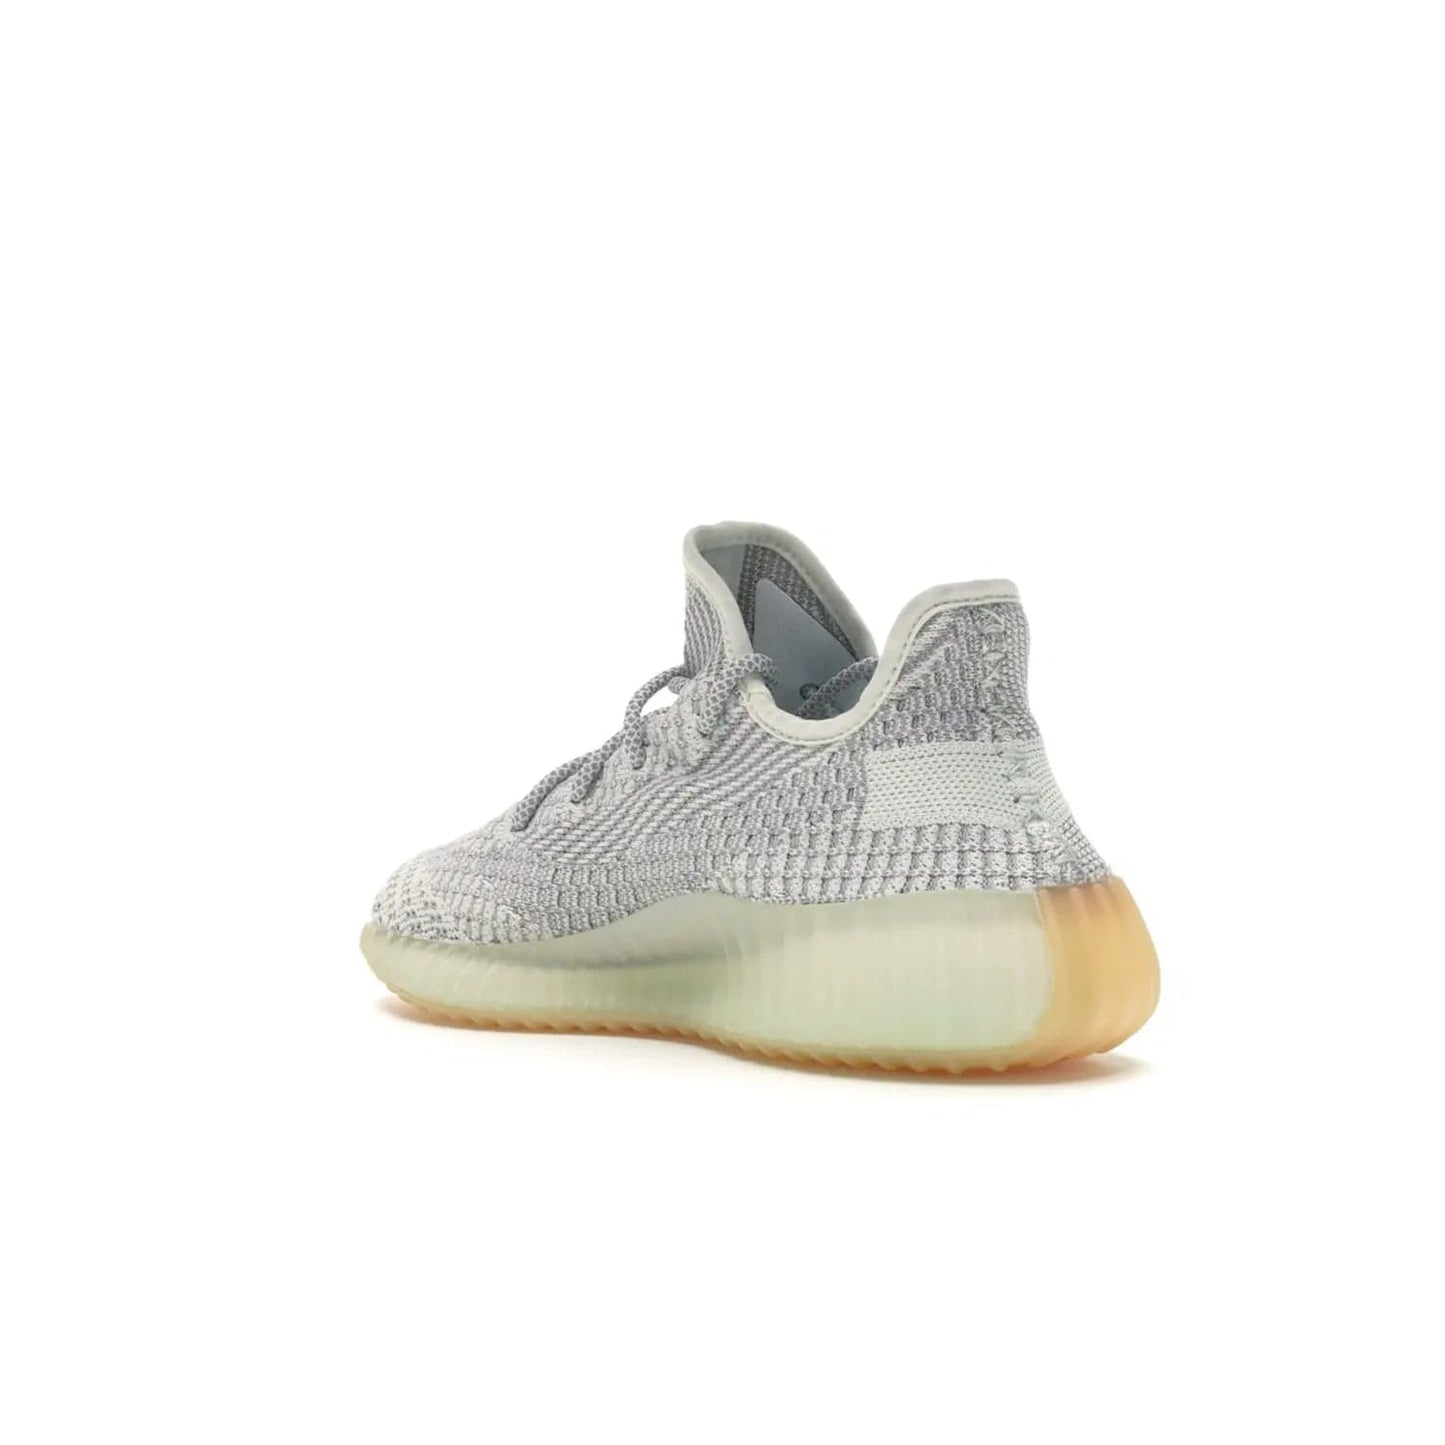 adidas Yeezy Boost 350 V2 Yeshaya (Non-Reflective) - Image 24 - Only at www.BallersClubKickz.com - Step out in style with the adidas Yeezy Boost 350 V2 Yeshaya (Non-Reflective). Gray-and-white Primeknit upper with mesh side stripe & rope laces, plus a translucent Boost sole with a hint of yellow. Make a statement and feel comfortable with this stylish sneaker.